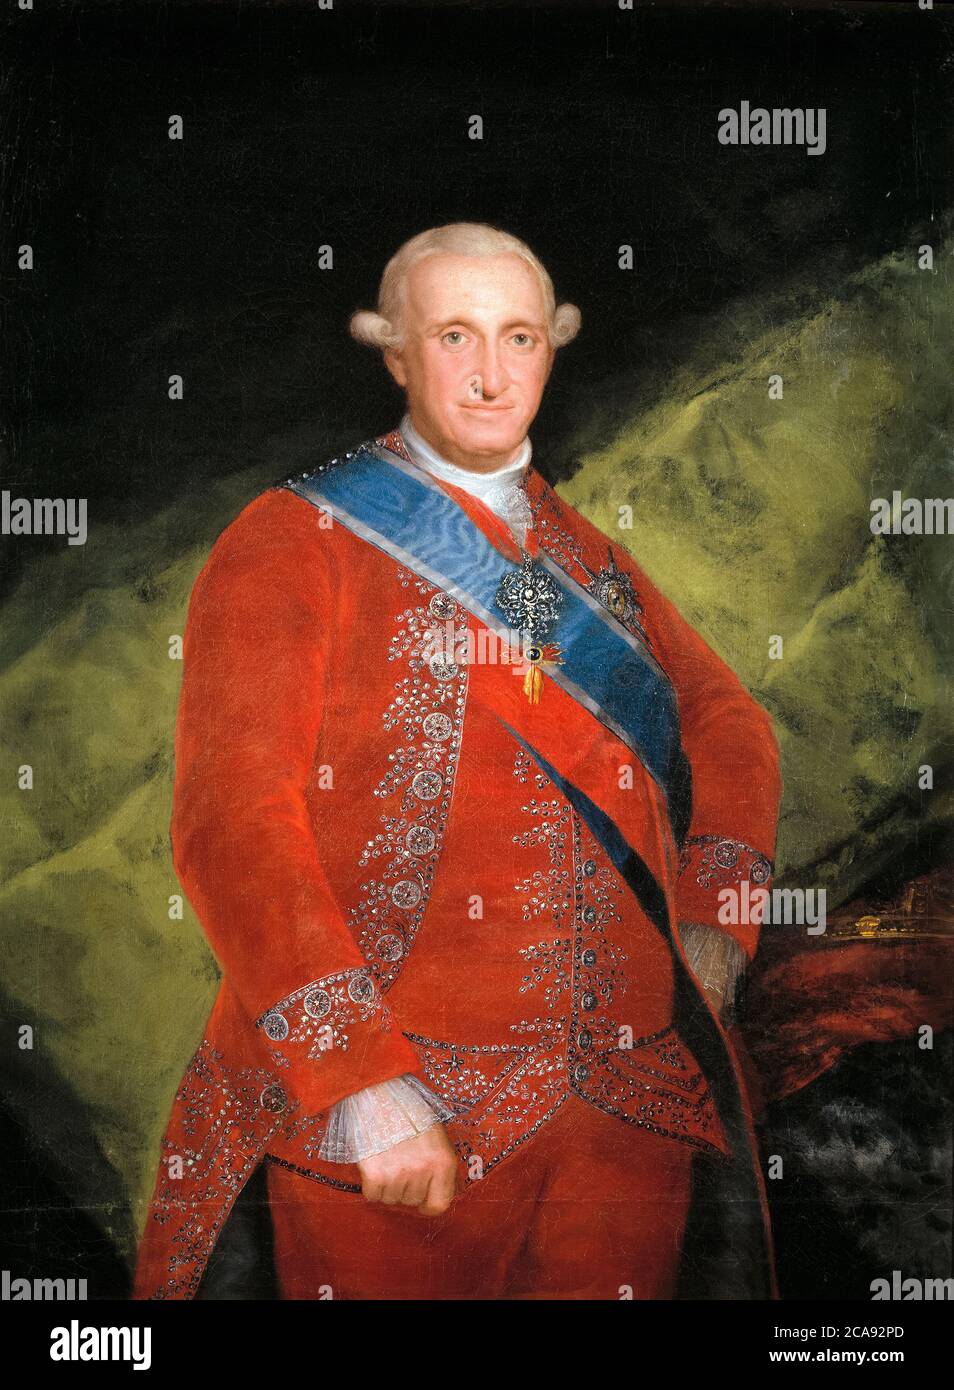 Charles IV (1748-1819), King of Spain, in red, portrait painting by Francisco Goya, 1789 Stock Photo